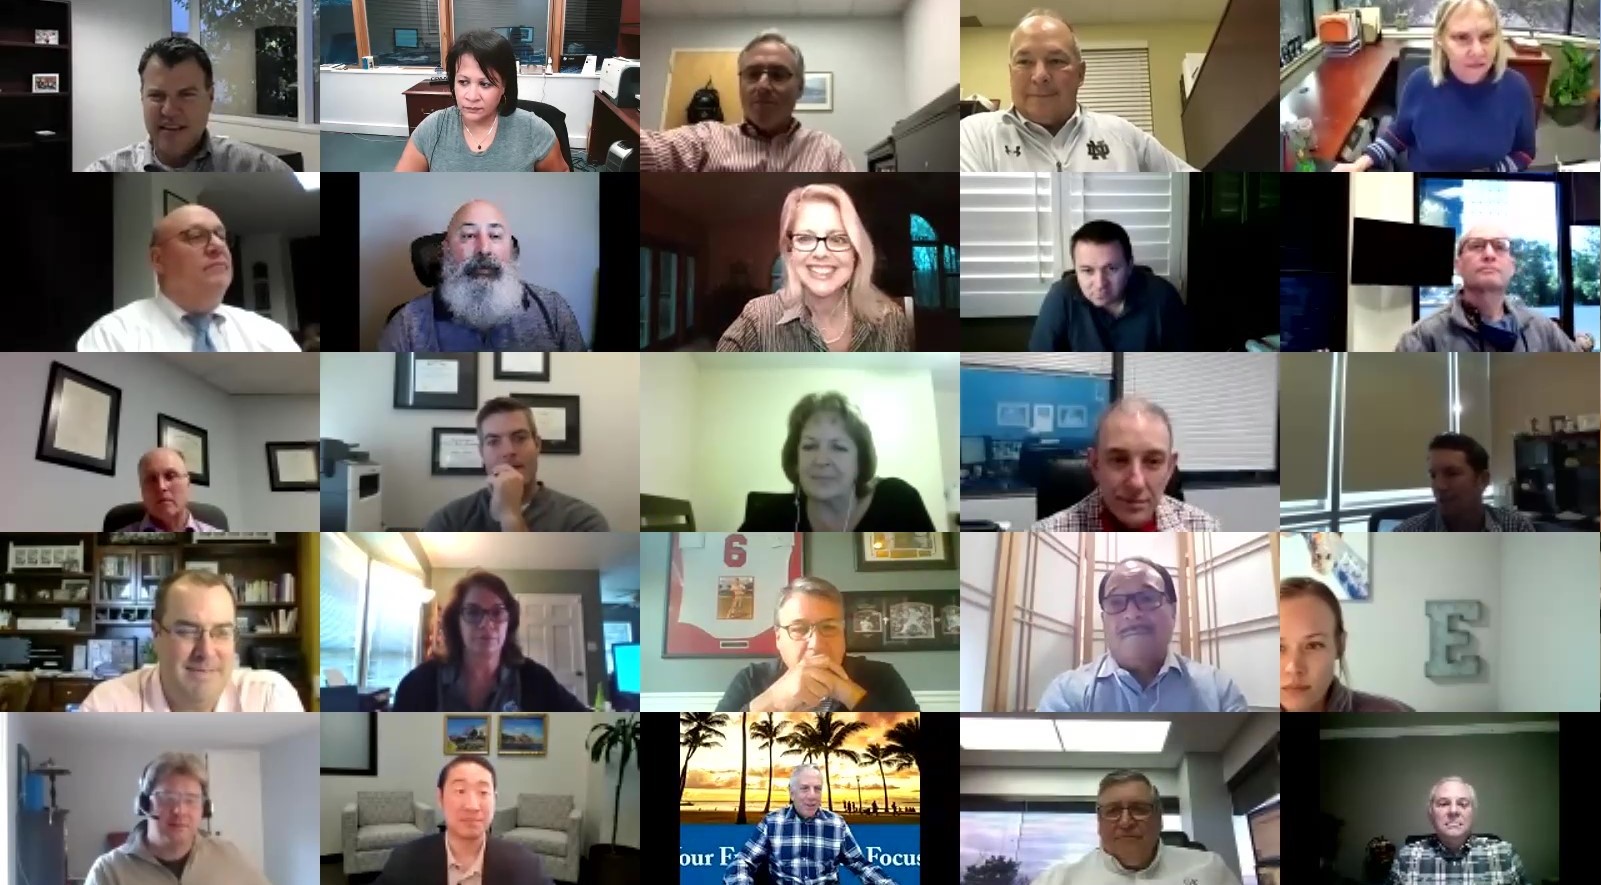 MGI with CPAAI North America Virtual Conference 2020